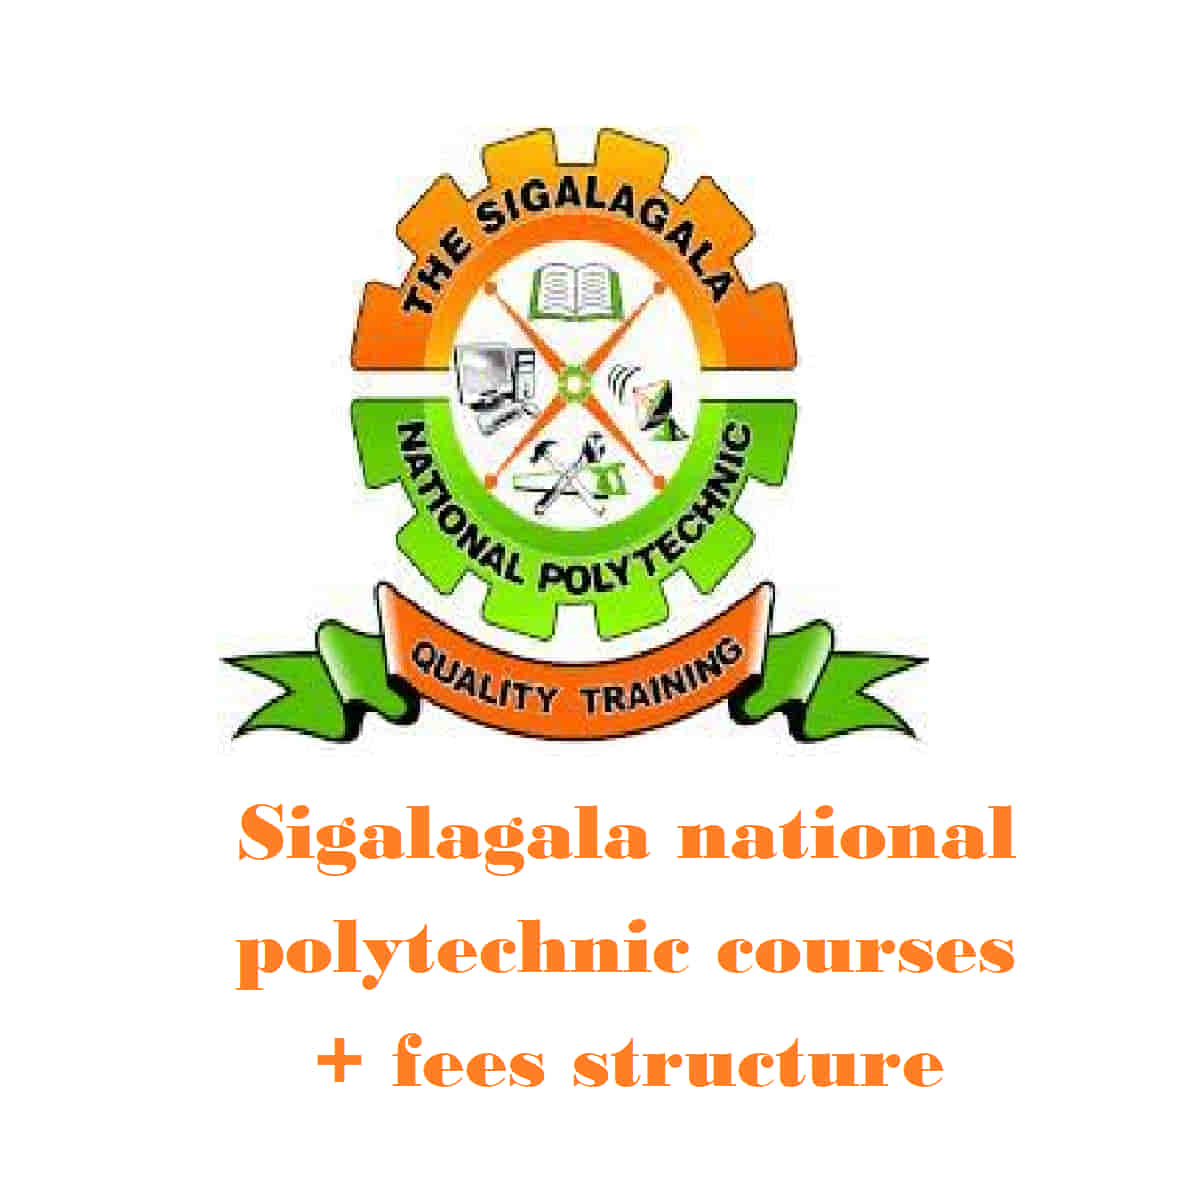 Sigalagala national polytechnic courses and fees structure